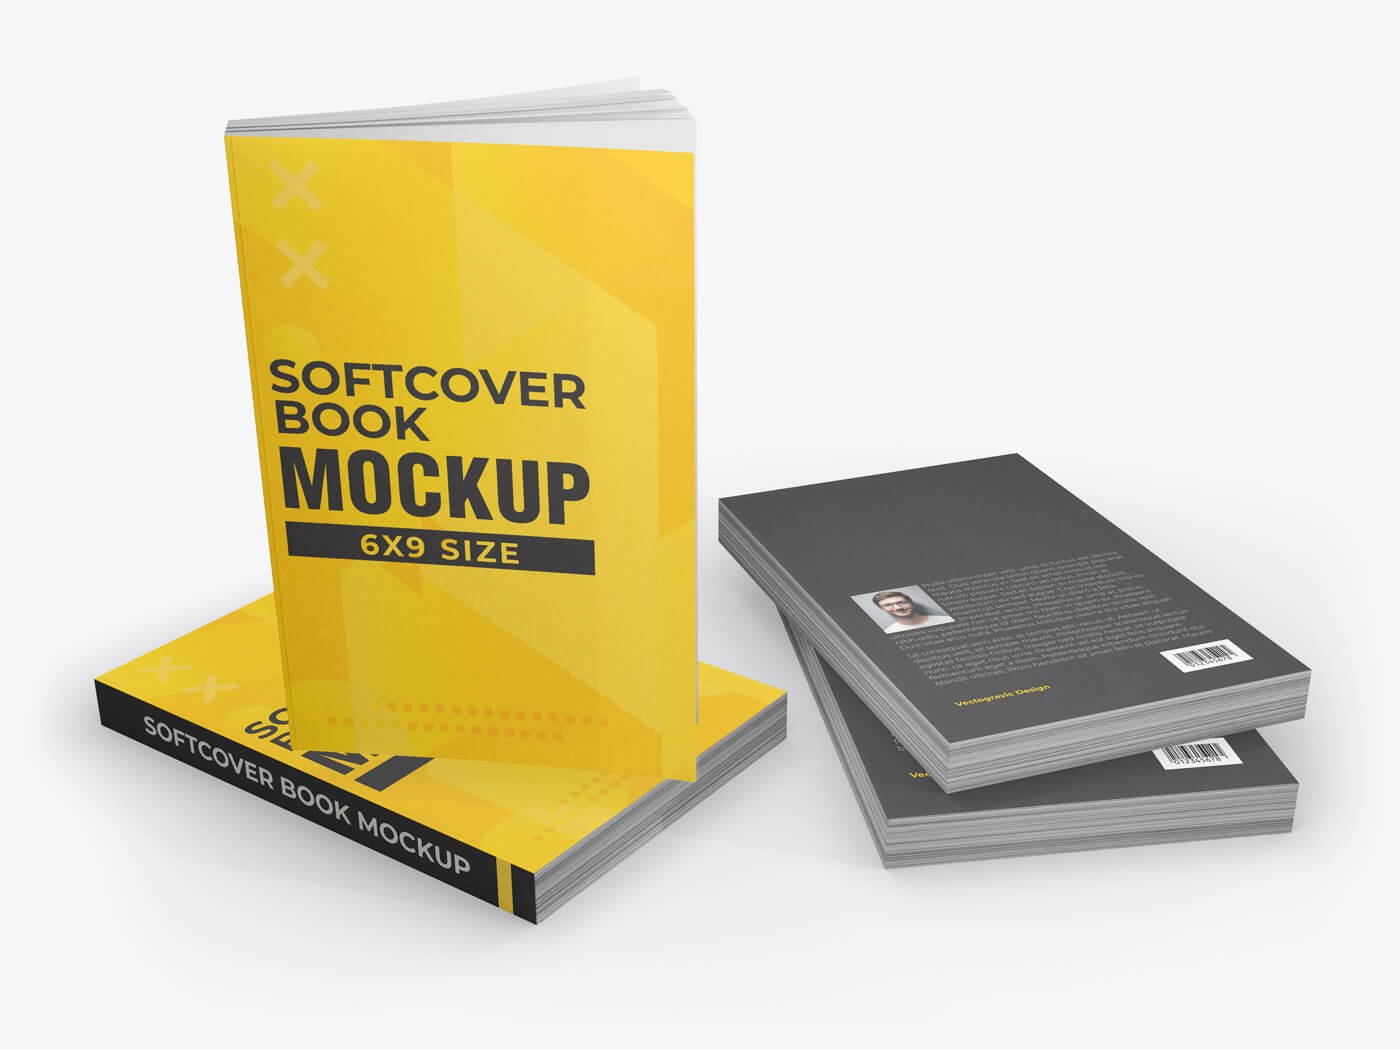 softcover book mockup 03 769